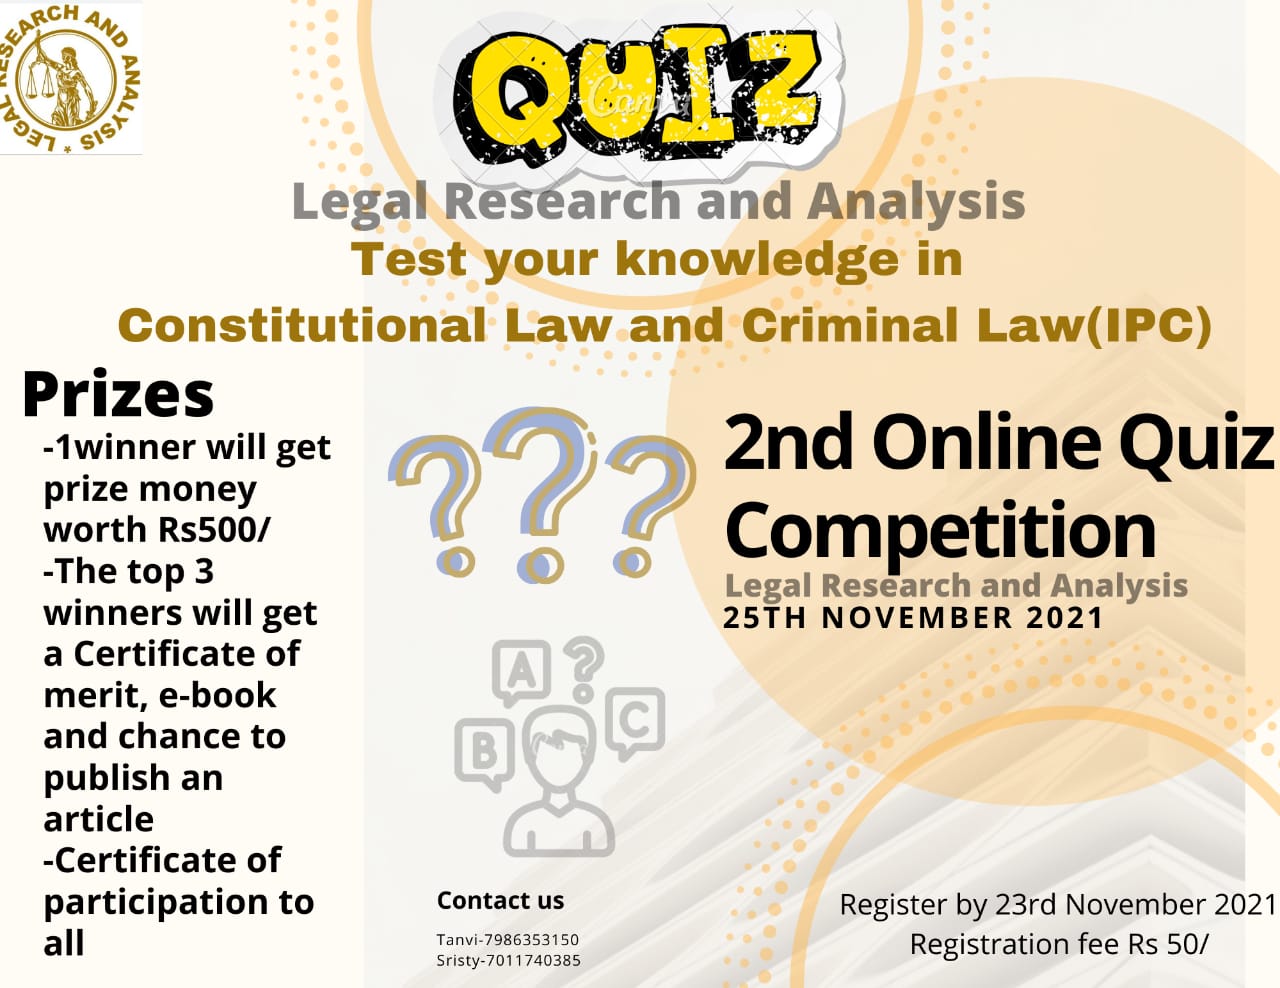 2nd Online National Quiz Competition on Constitutional law and Criminal law(IPC).